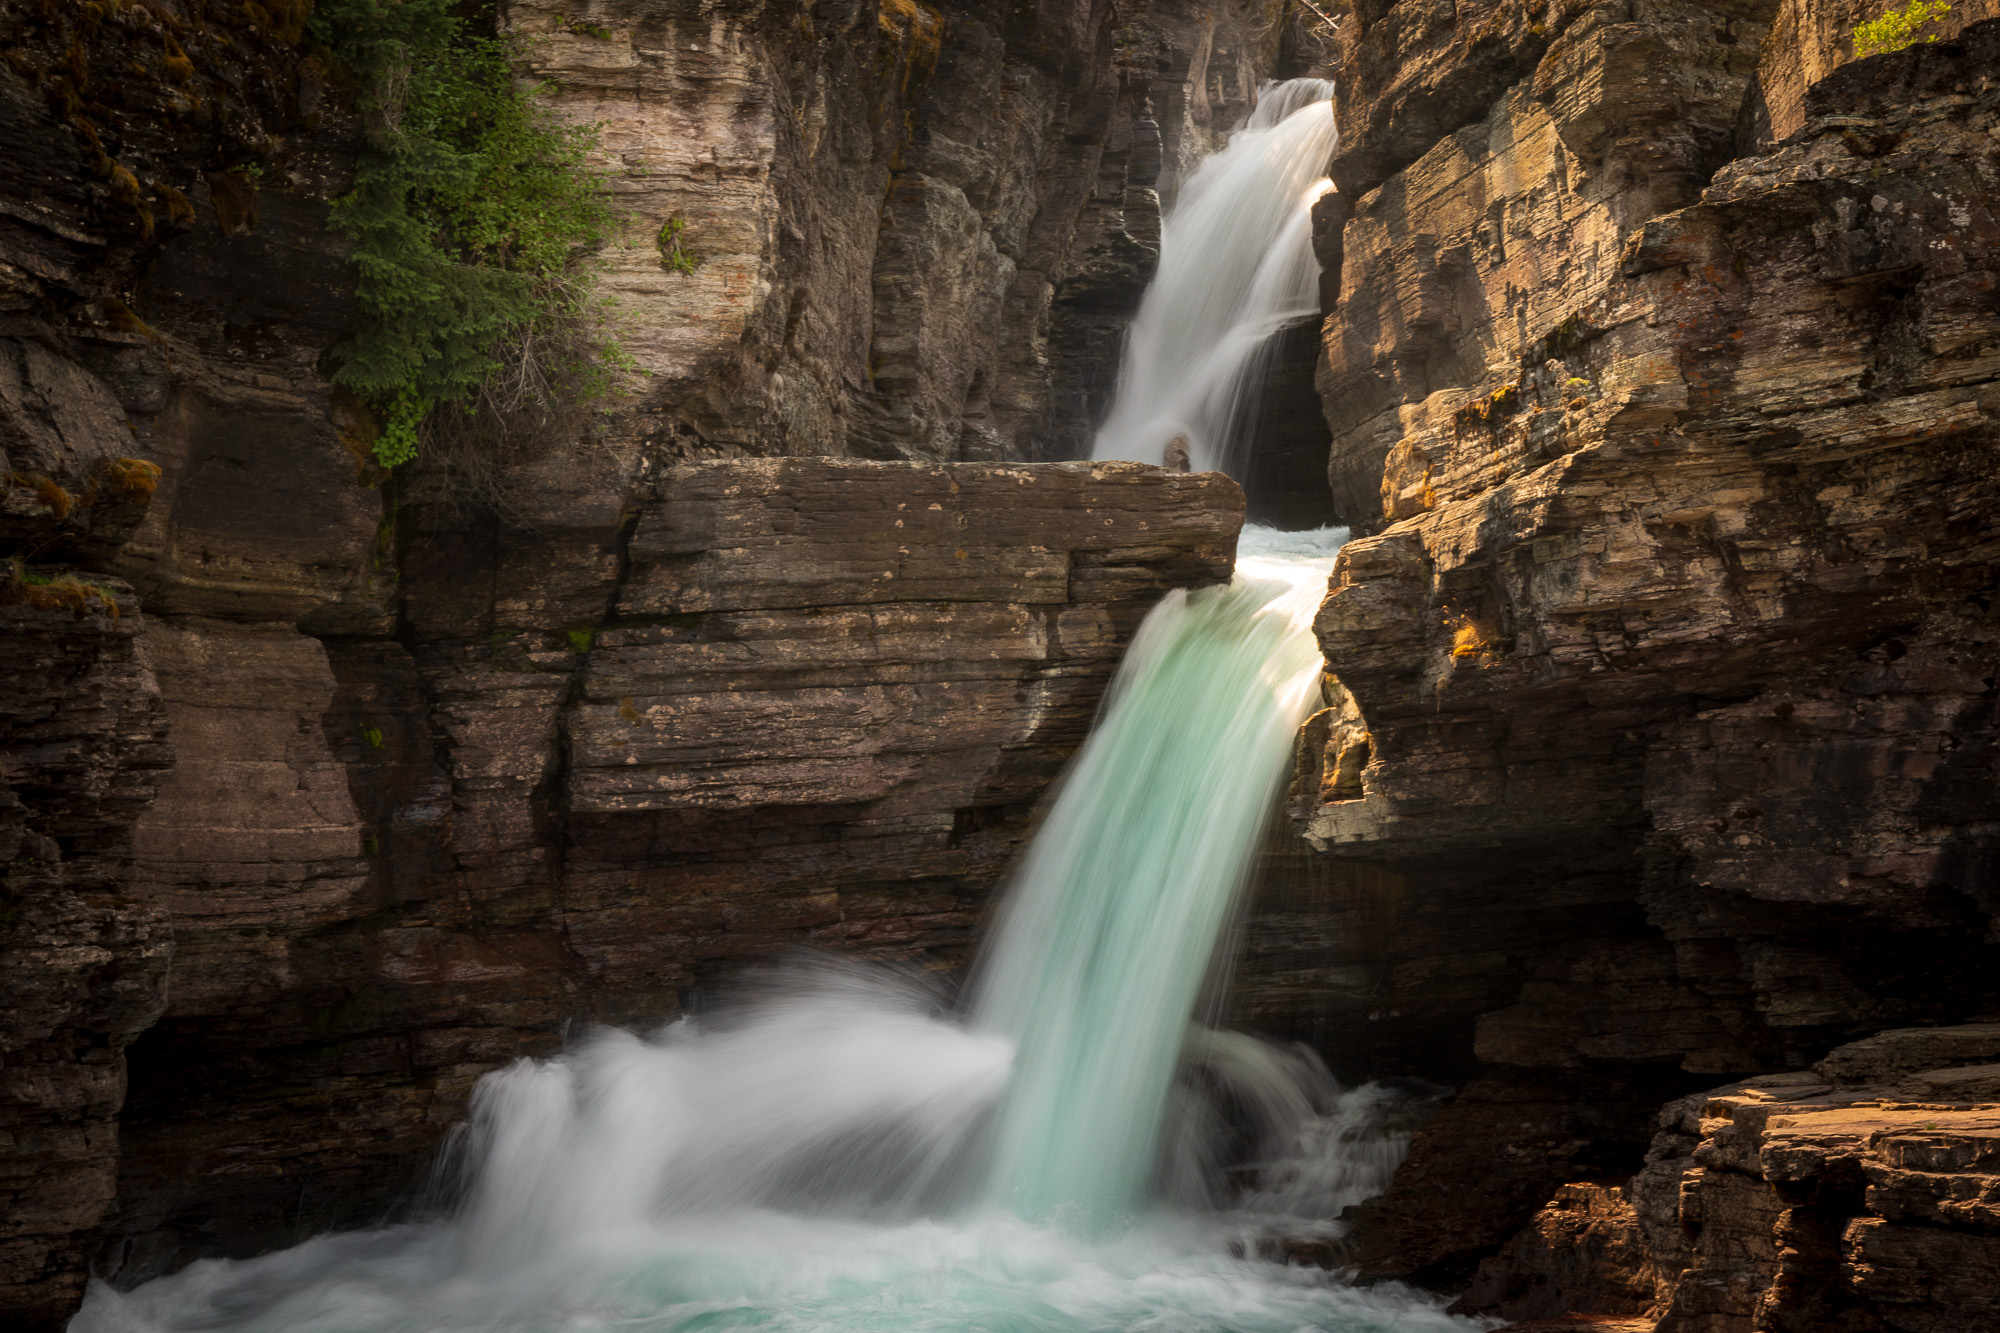 Virginia Falls, Glacier National Park. Photo by James Beissel